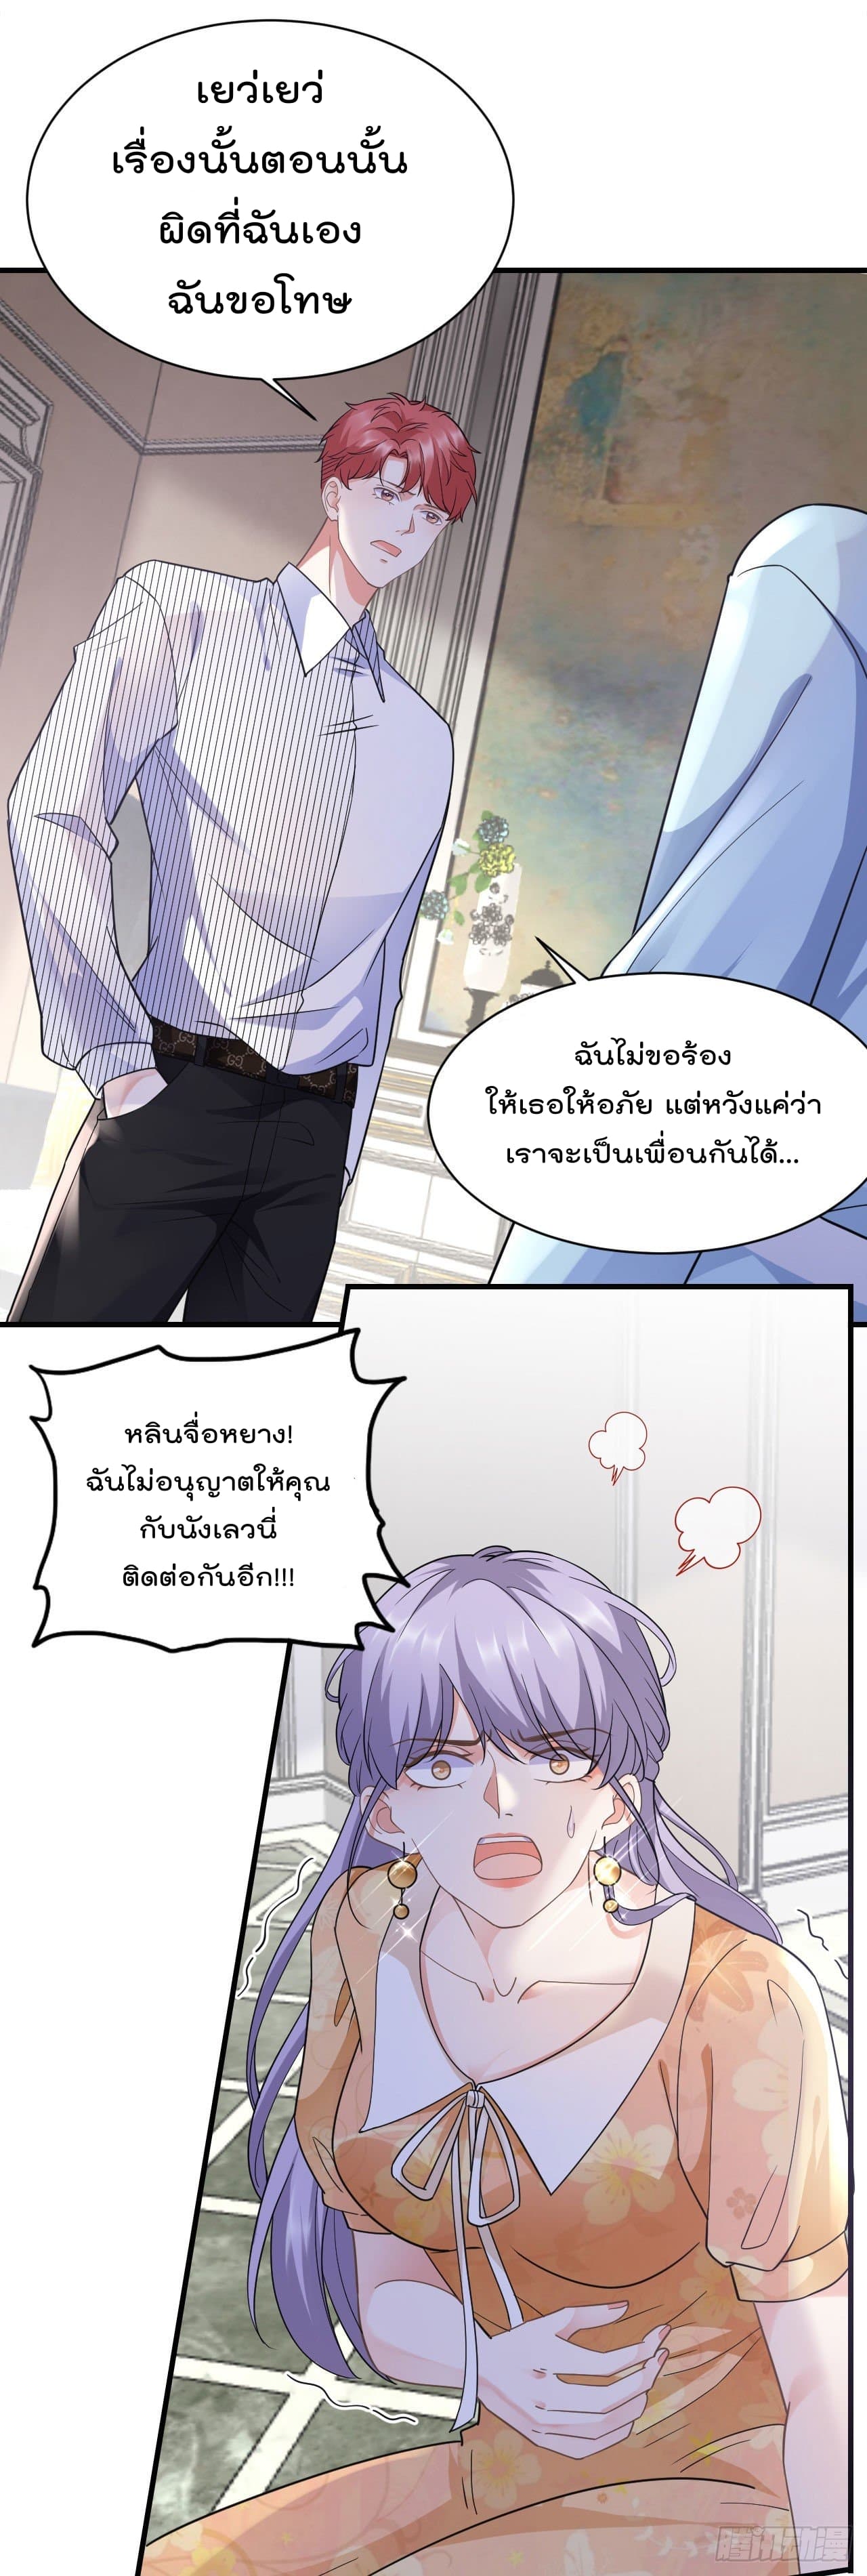 What Can the Eldest Lady Have คุณหนูใหญ่ ทำไมคุณร้ายอย่างนี้ 9-9